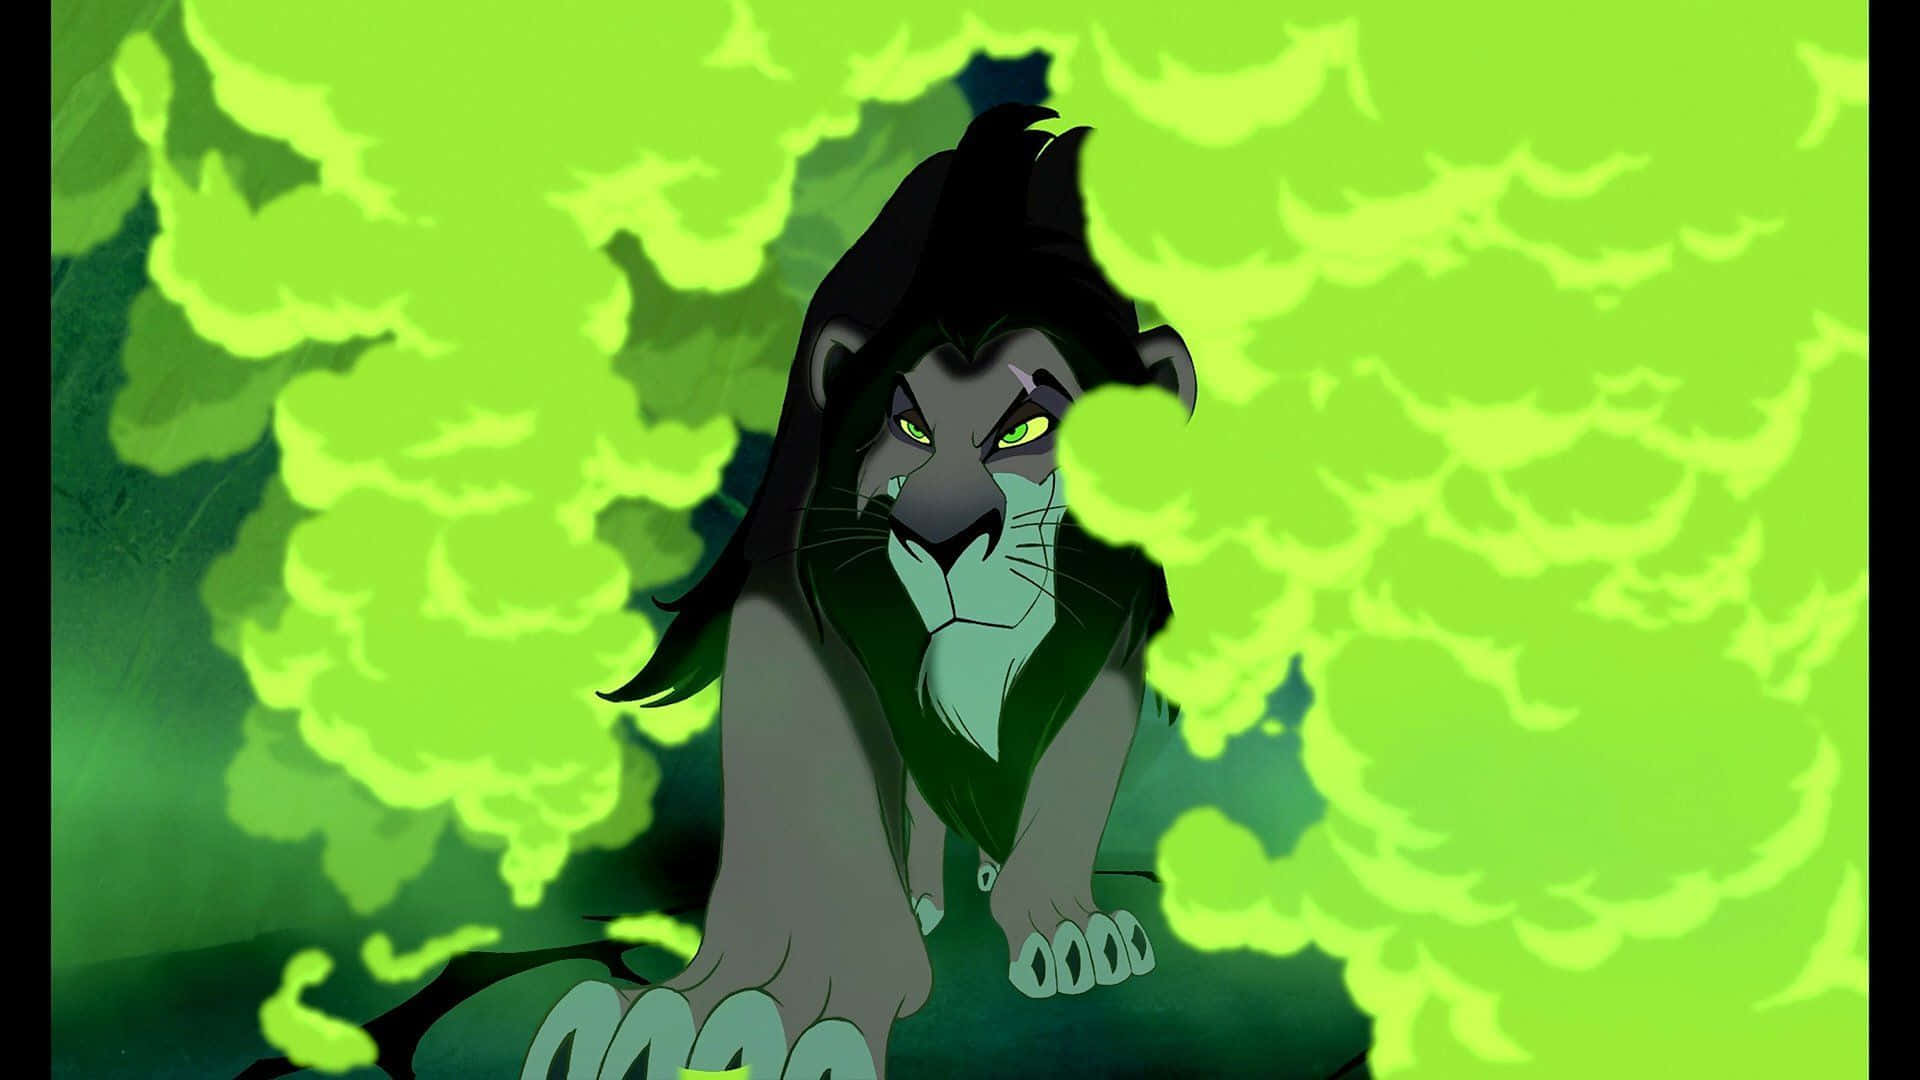 Look fearfully into the eyes of Scar, King of the Pridelands. Wallpaper